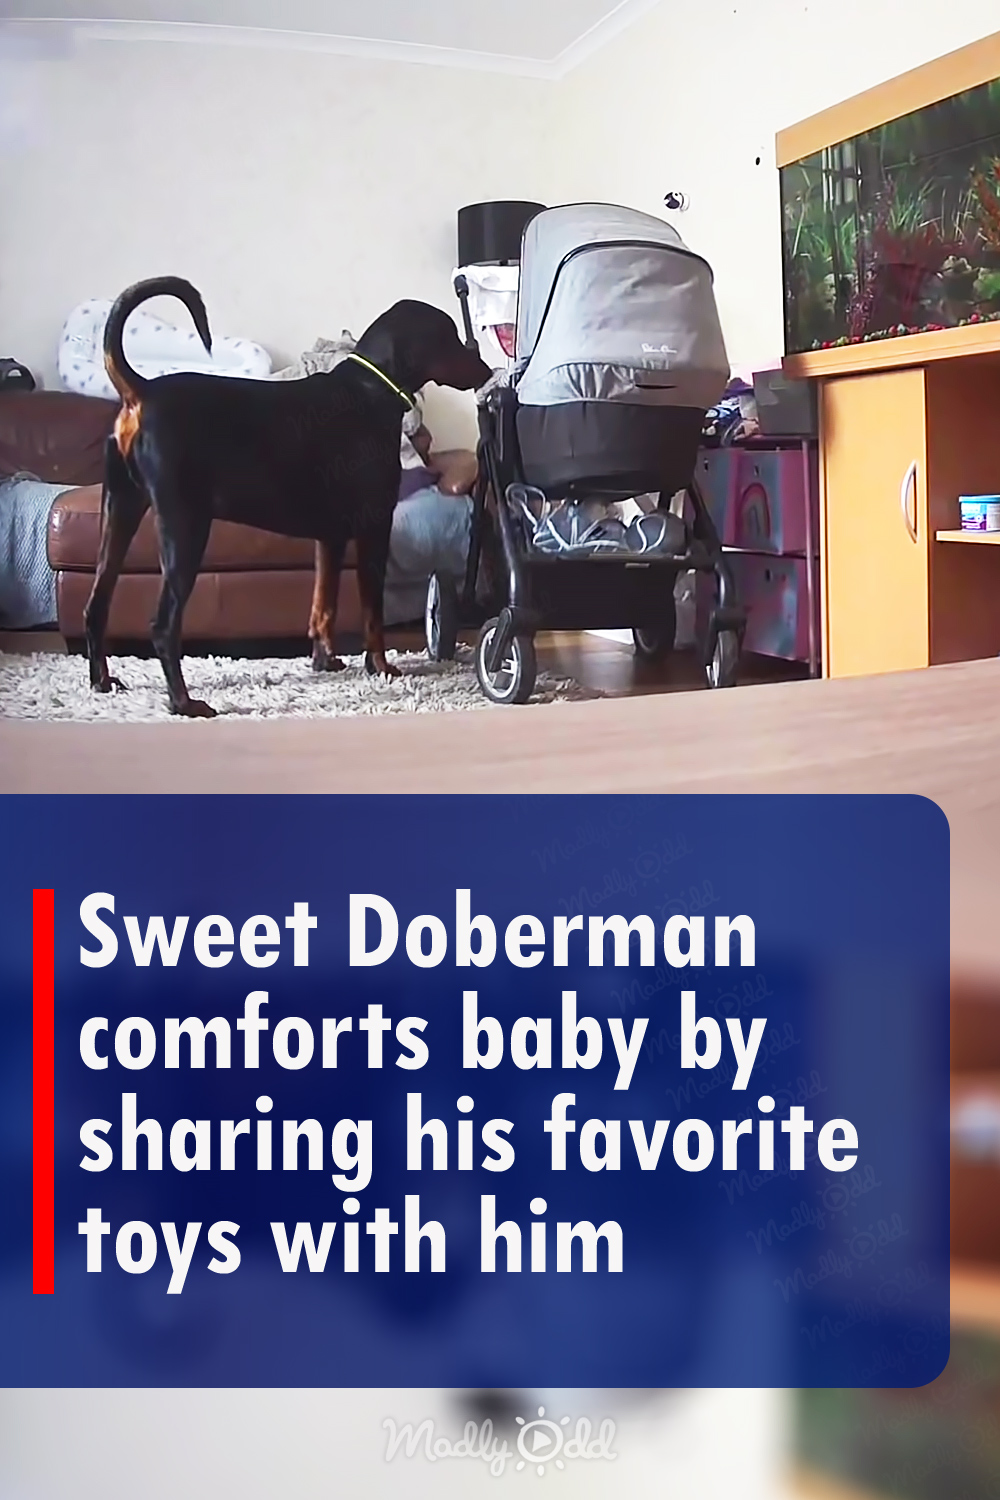 Sweet Doberman comforts baby by sharing his favorite toys with him